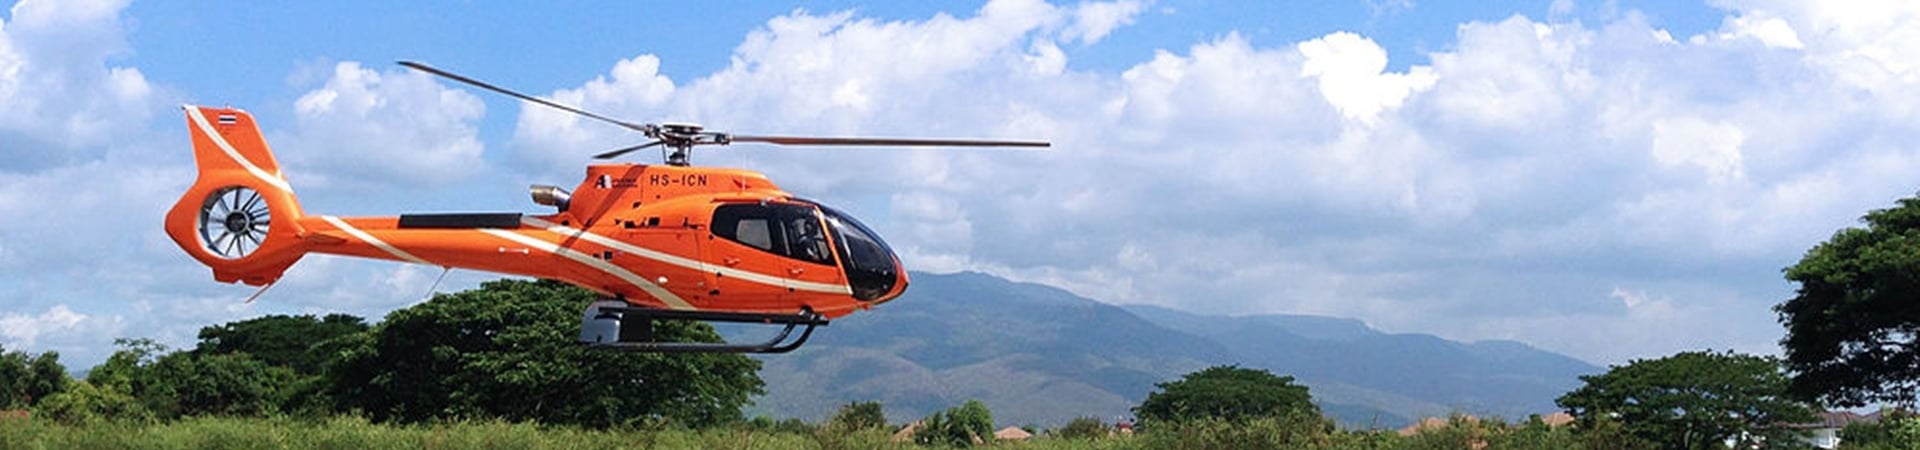 Image of Chiang Mai From Above by Private Helicopter